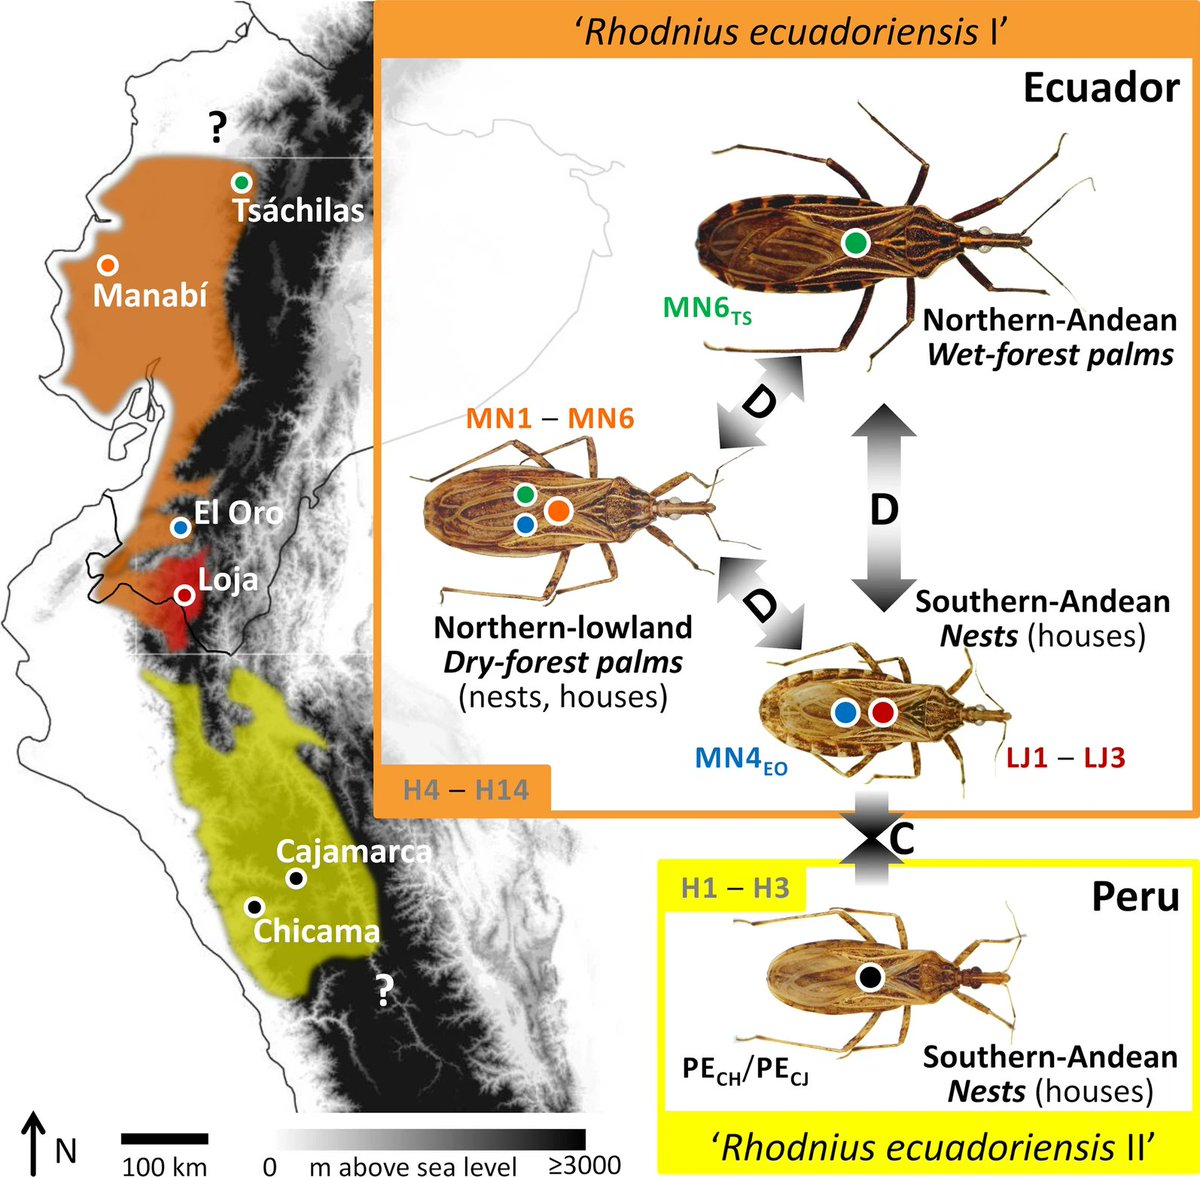 Under pressure: phenotypic divergence and convergence associated with microhabitat adaptations in triatomine bugs, the vectors of Chagas disease. #WorldChagasDiseaseDay 

parasitesandvectors.biomedcentral.com/articles/10.11…